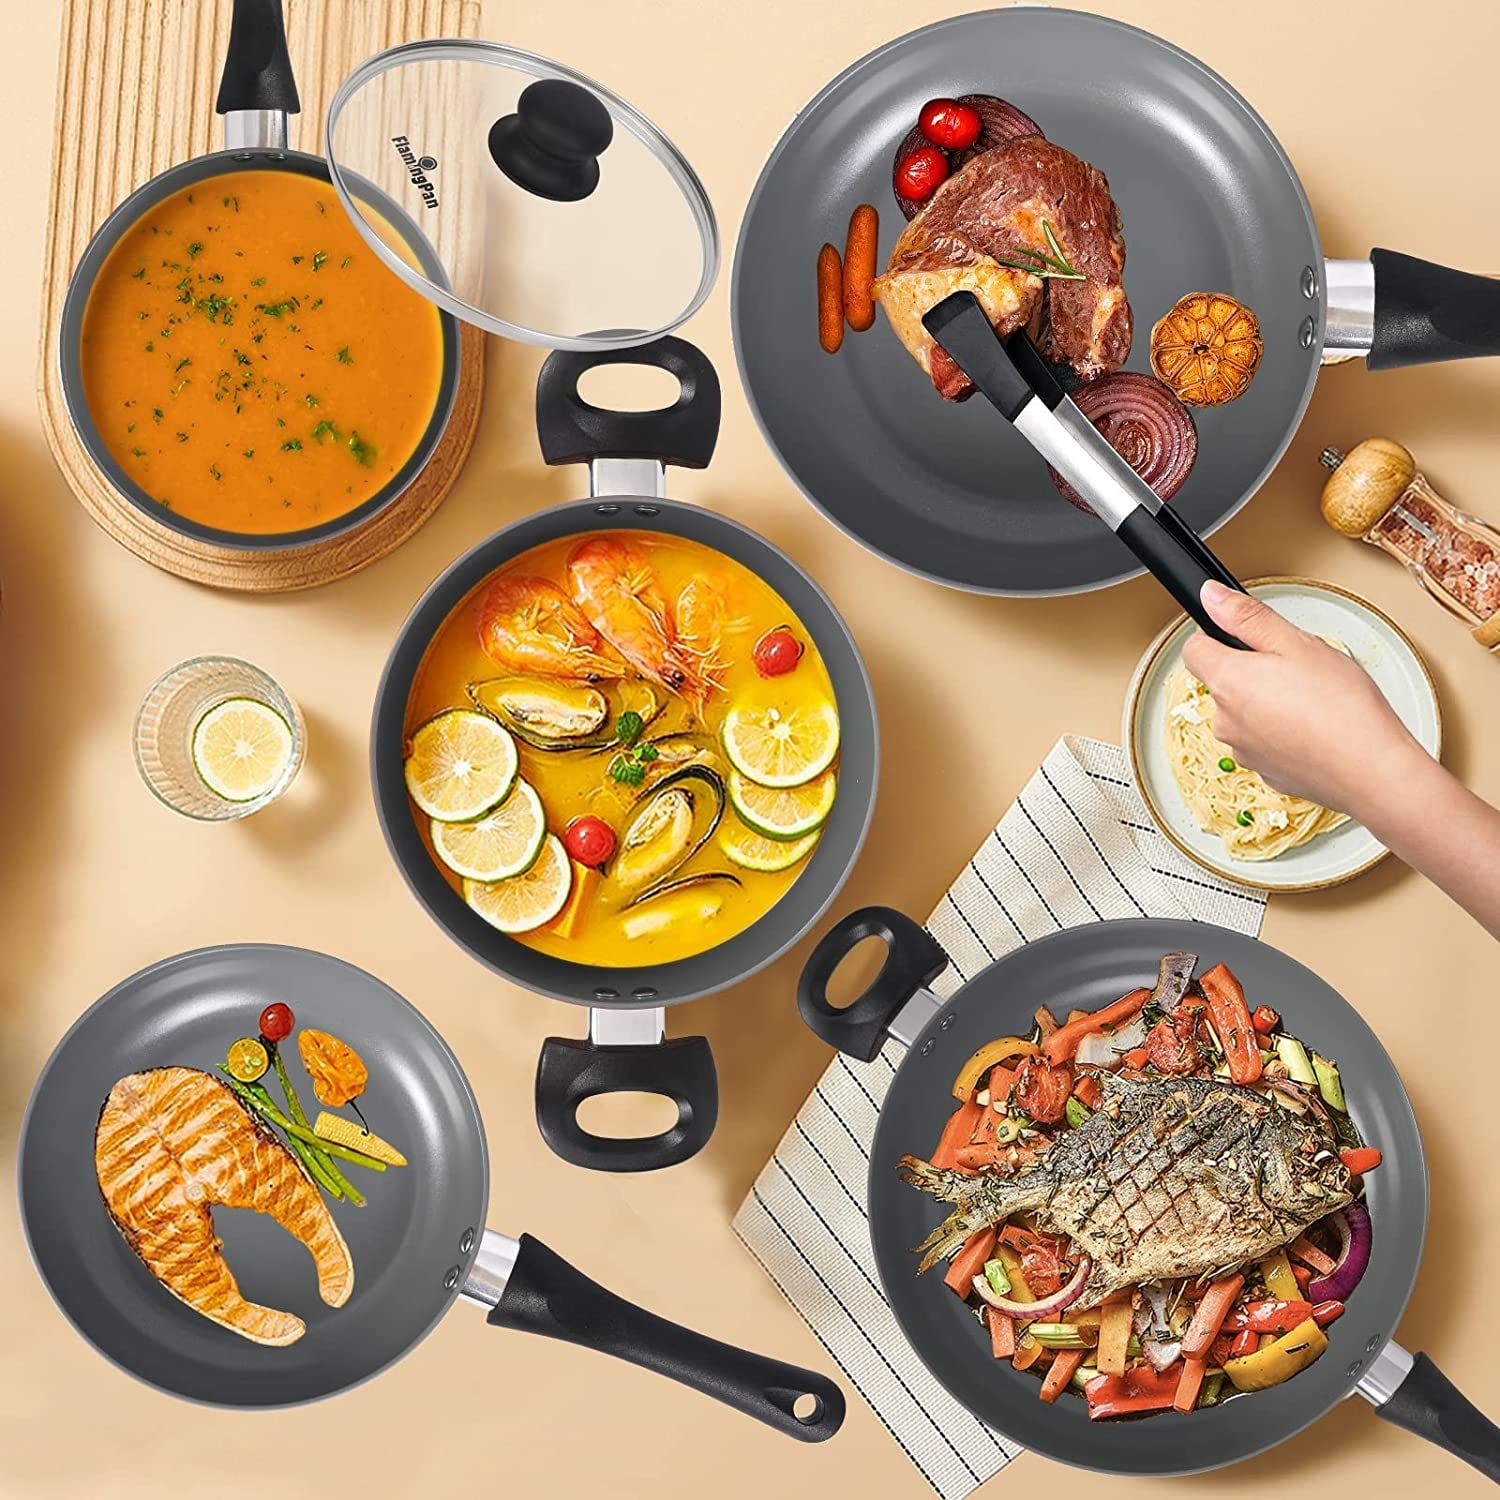 https://ak1.ostkcdn.com/images/products/is/images/direct/d33b3ff0e70c26d9dad36cd4ee0a2bf33e995e4e/12-Piece-Nonstick-Pots-and-Pans-Sets%2CKitchen-Cookware-with-Ceramic-Coating%2CDishwasher-Safe%2CFrying-Pan-Set-with-Lid.jpg